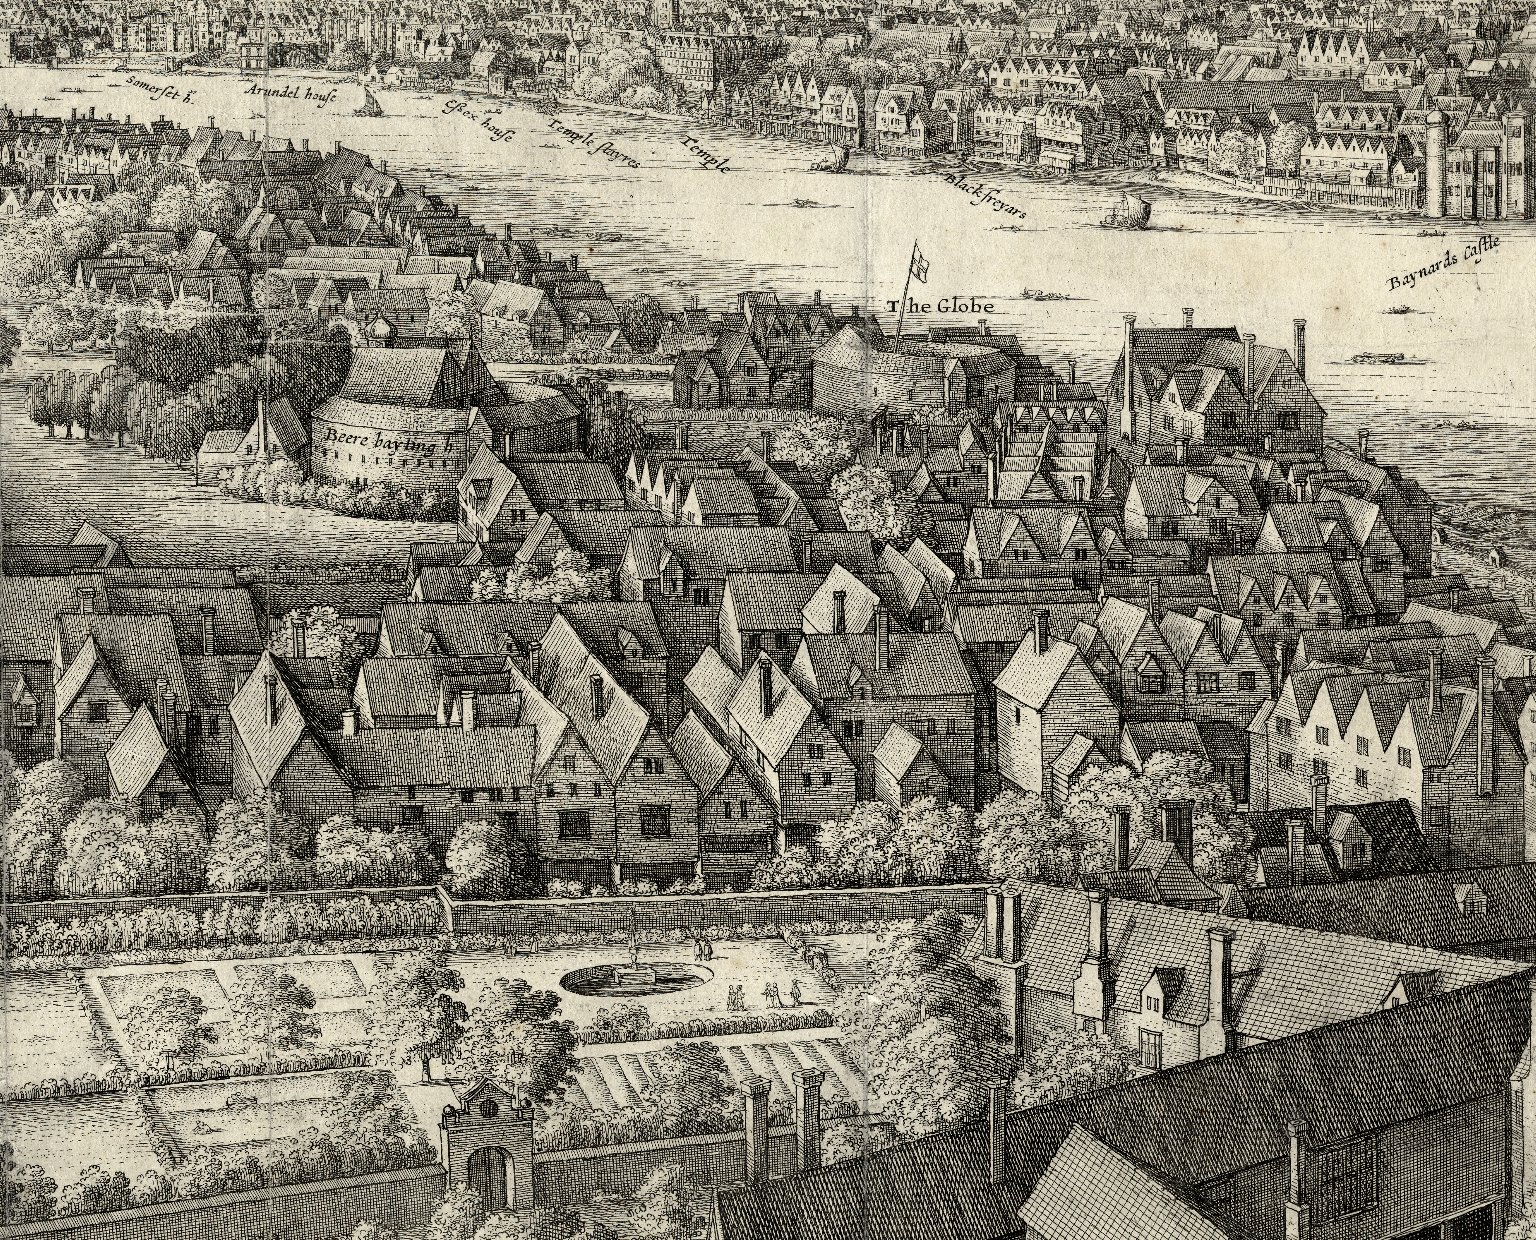 View of Bankside, including the Globe and the Bear Garden, by Wenceslaus Hollar. Image courtesy of the Folger Digital Image Collection.